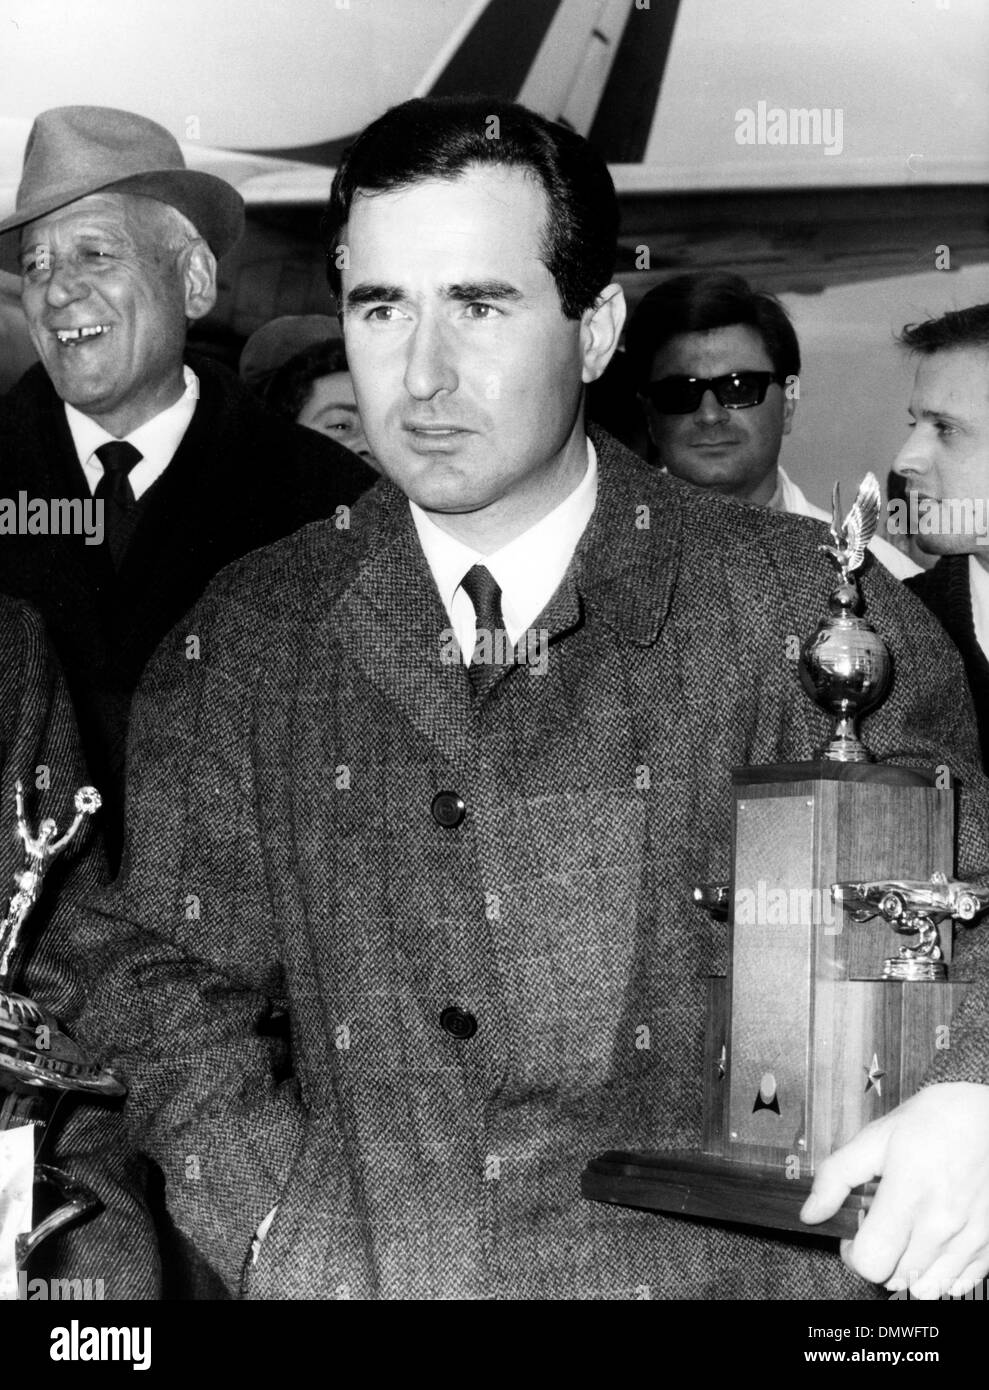 Feb 09, 1967; Rome, Italy; Italian racer LORENZO BANDINI who won the '24 hours' of Daytona Beach driving his 'Ferrari' P4, came back in Rome today at the Fiumicino Airport. (Credit Image: © KEYSTONE Pictures USA) Stock Photo